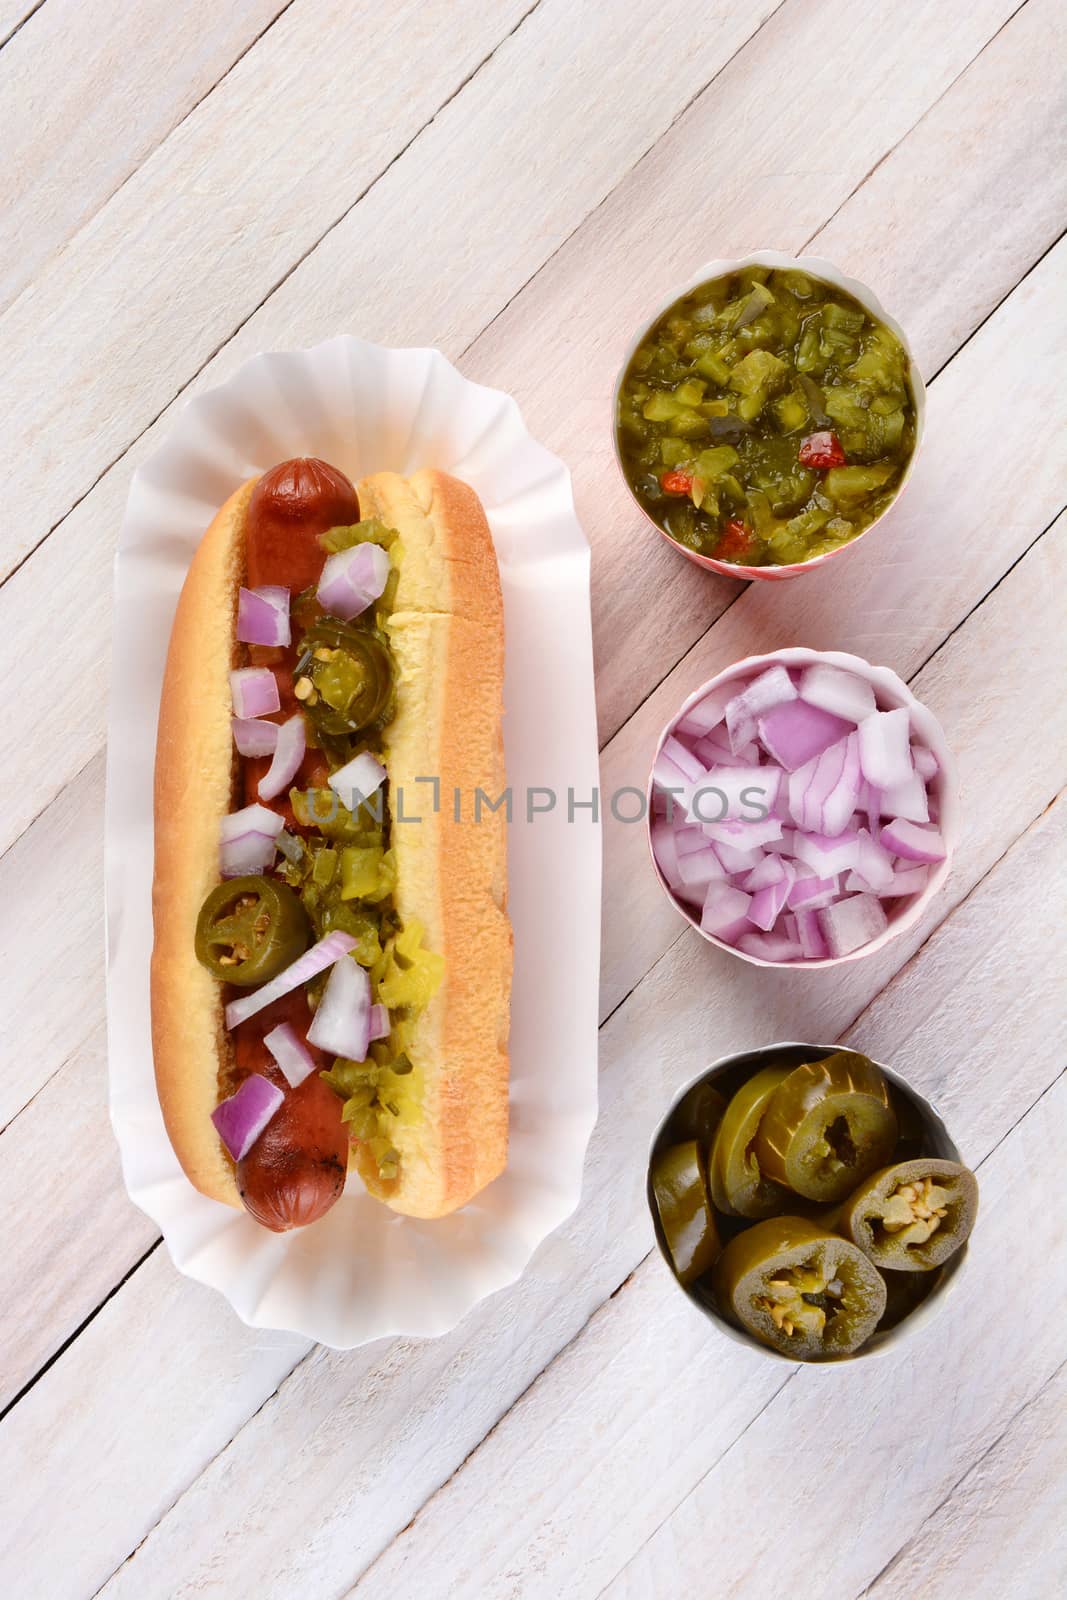 Overhead still life of a summer picnic table with a hot dog smothered in relish onions and jalapenos. Three cups of condiments are lined up next to the sandwich.